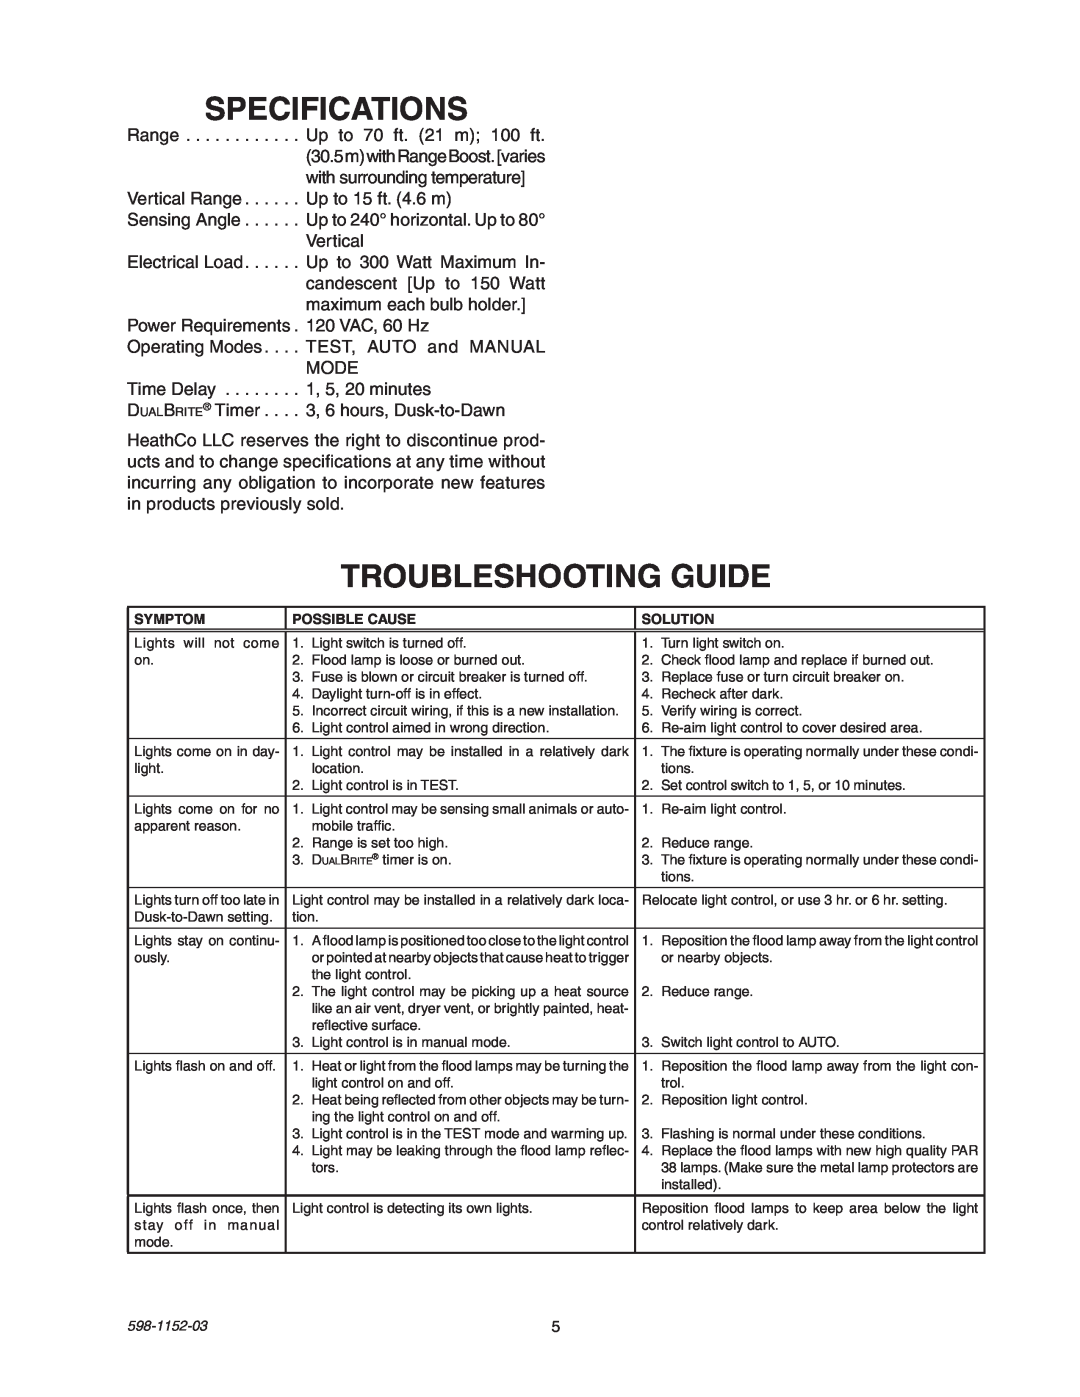 Heath Zenith SH-5105 manual Specifications, Troubleshooting Guide 